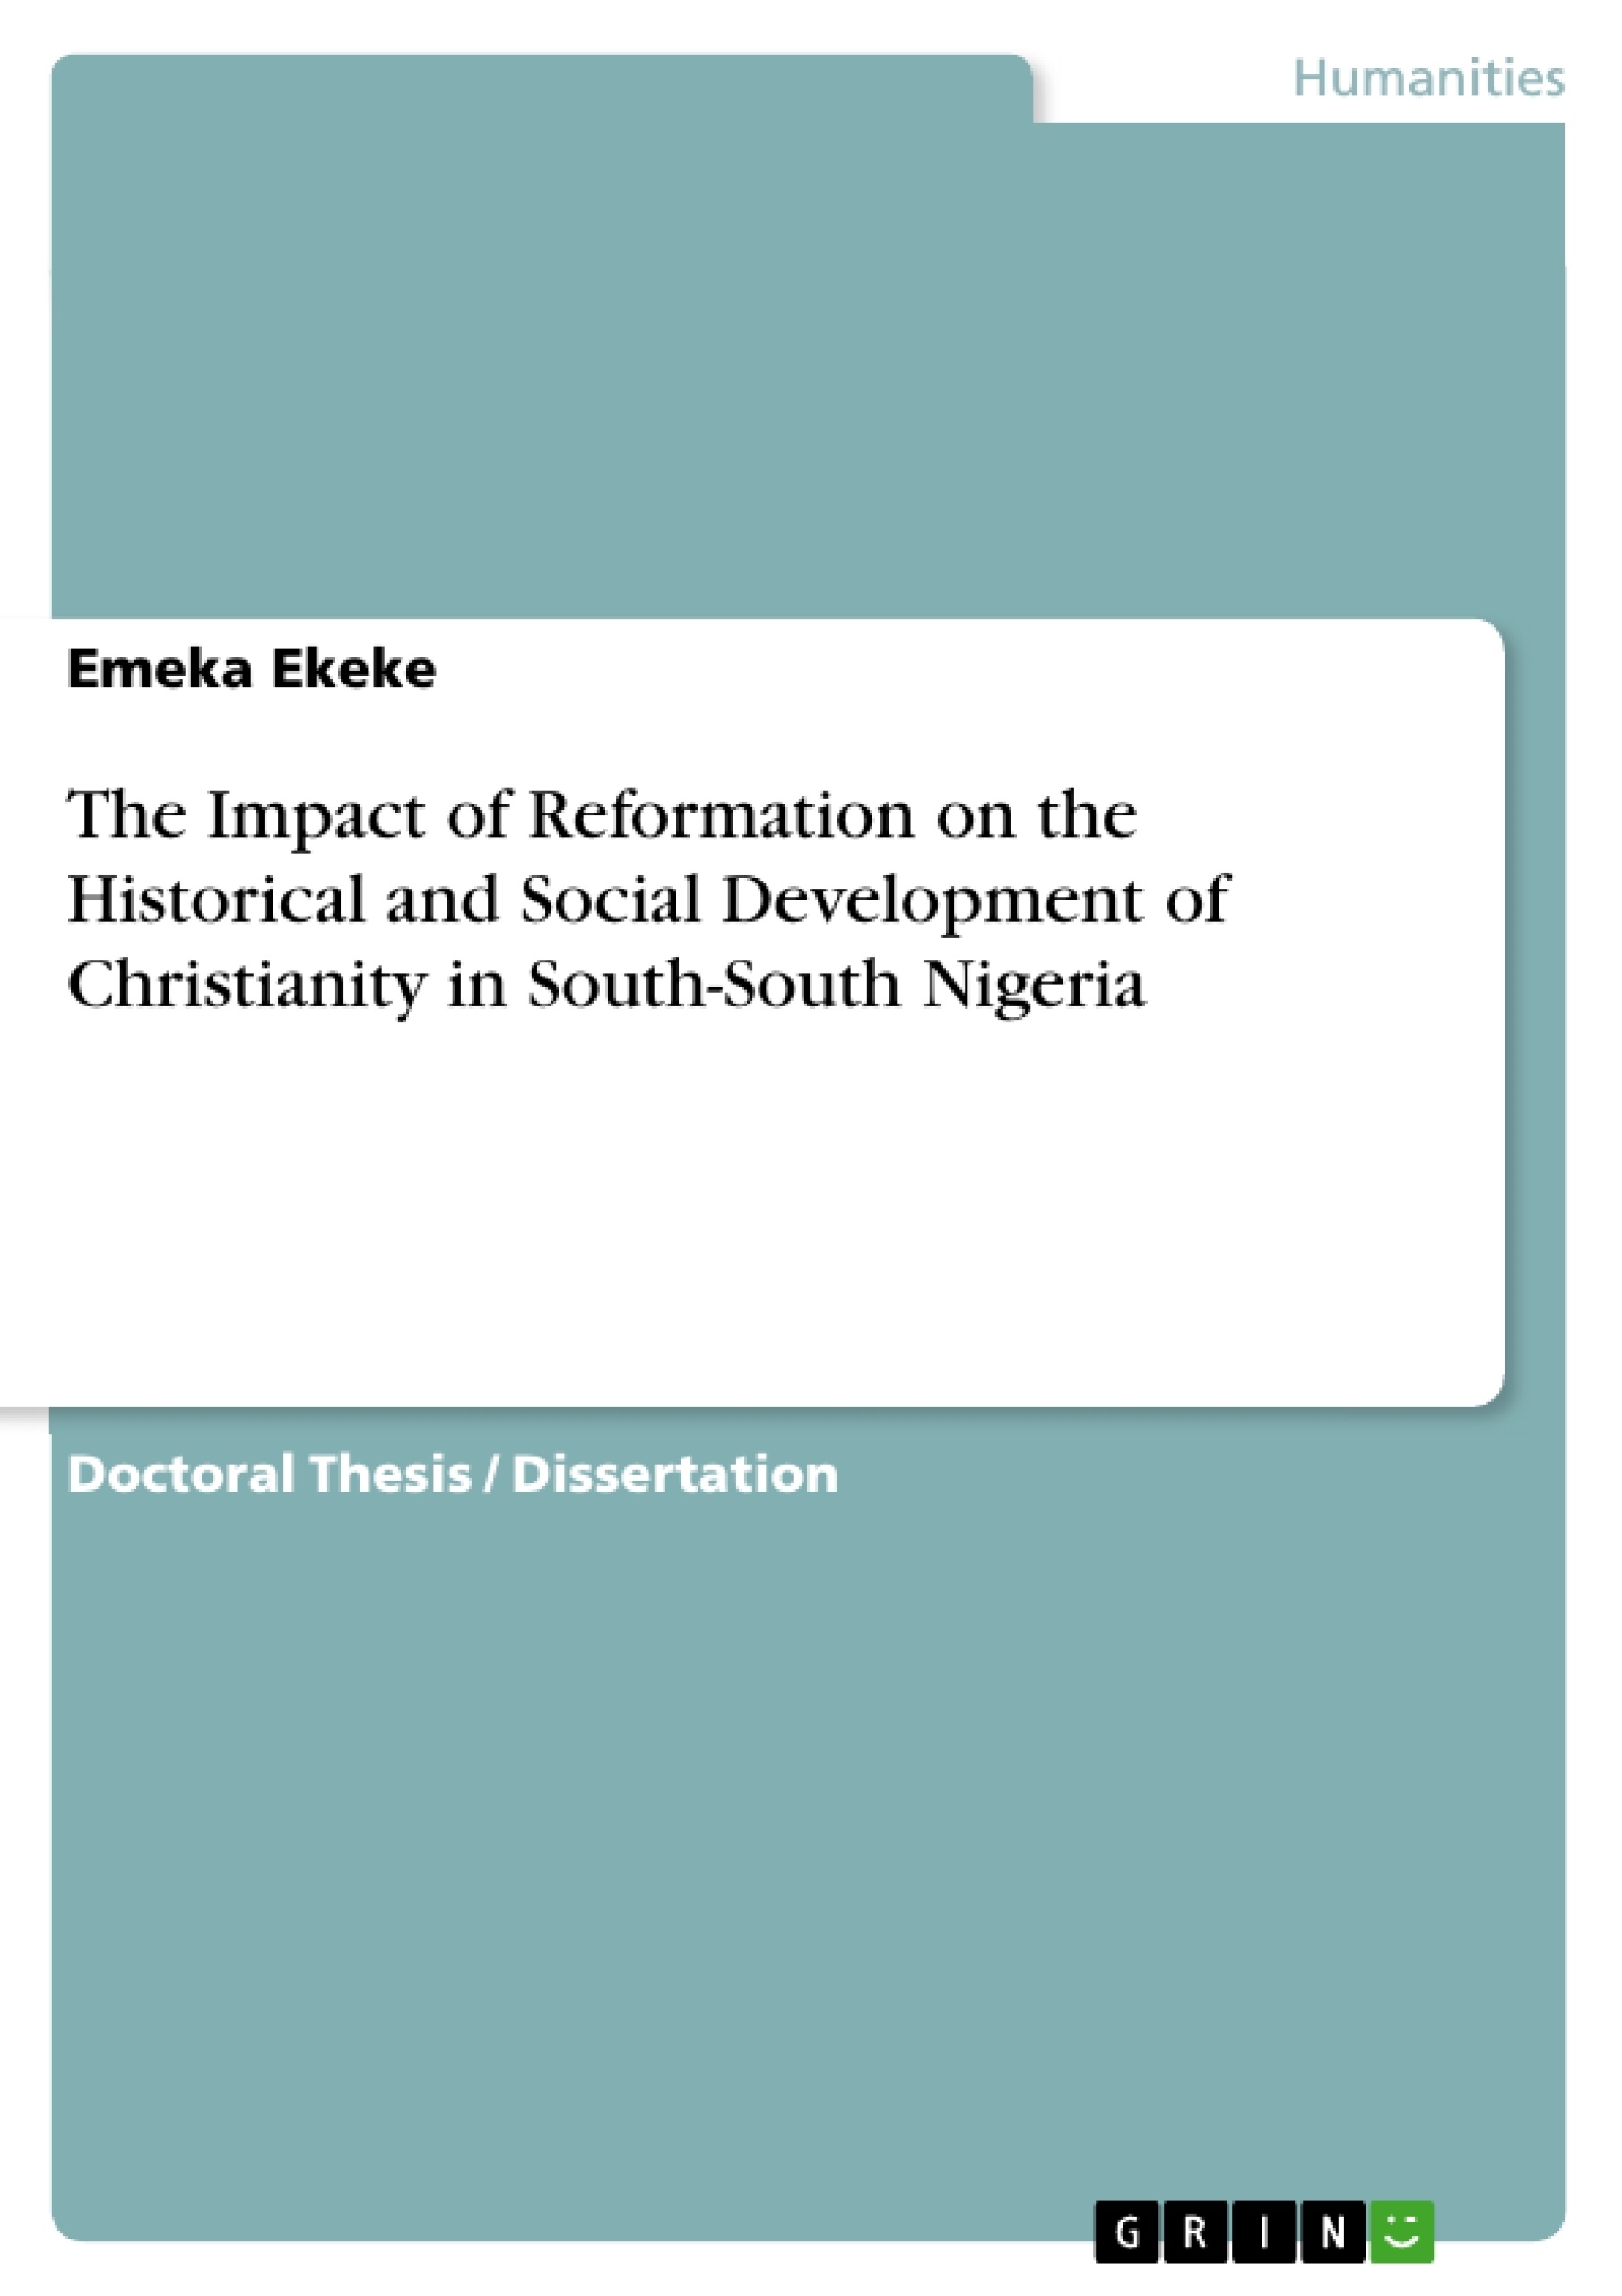 Title: The Impact of Reformation on the Historical and Social Development of Christianity in South-South Nigeria